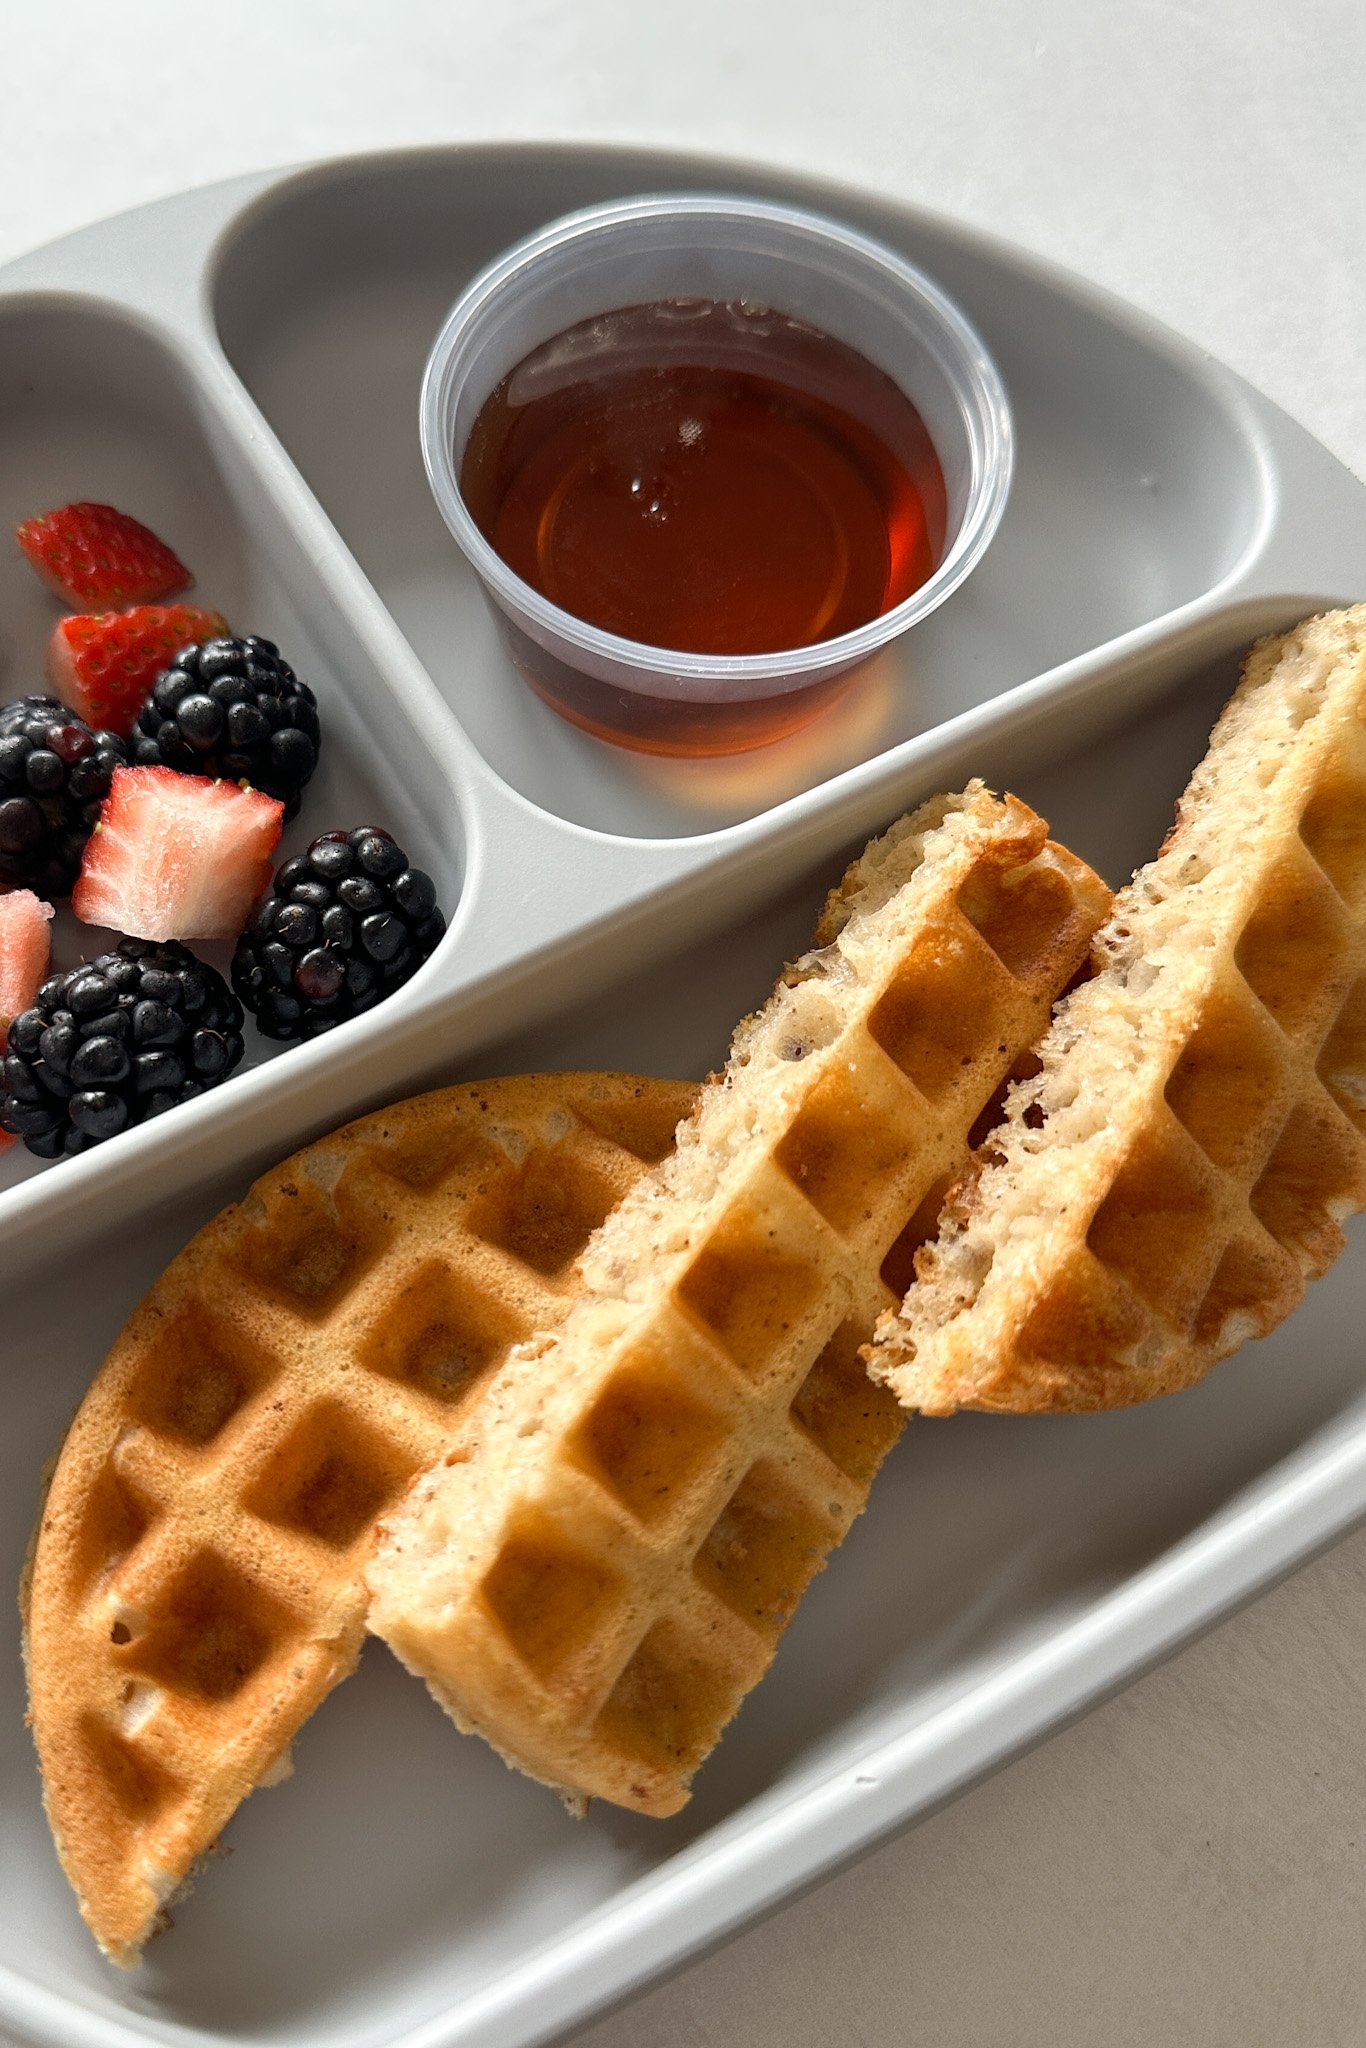 https://feedingtinybellies.com/wp-content/uploads/2023/01/Egg-free-waffles-served-with-maple-syrup.jpg